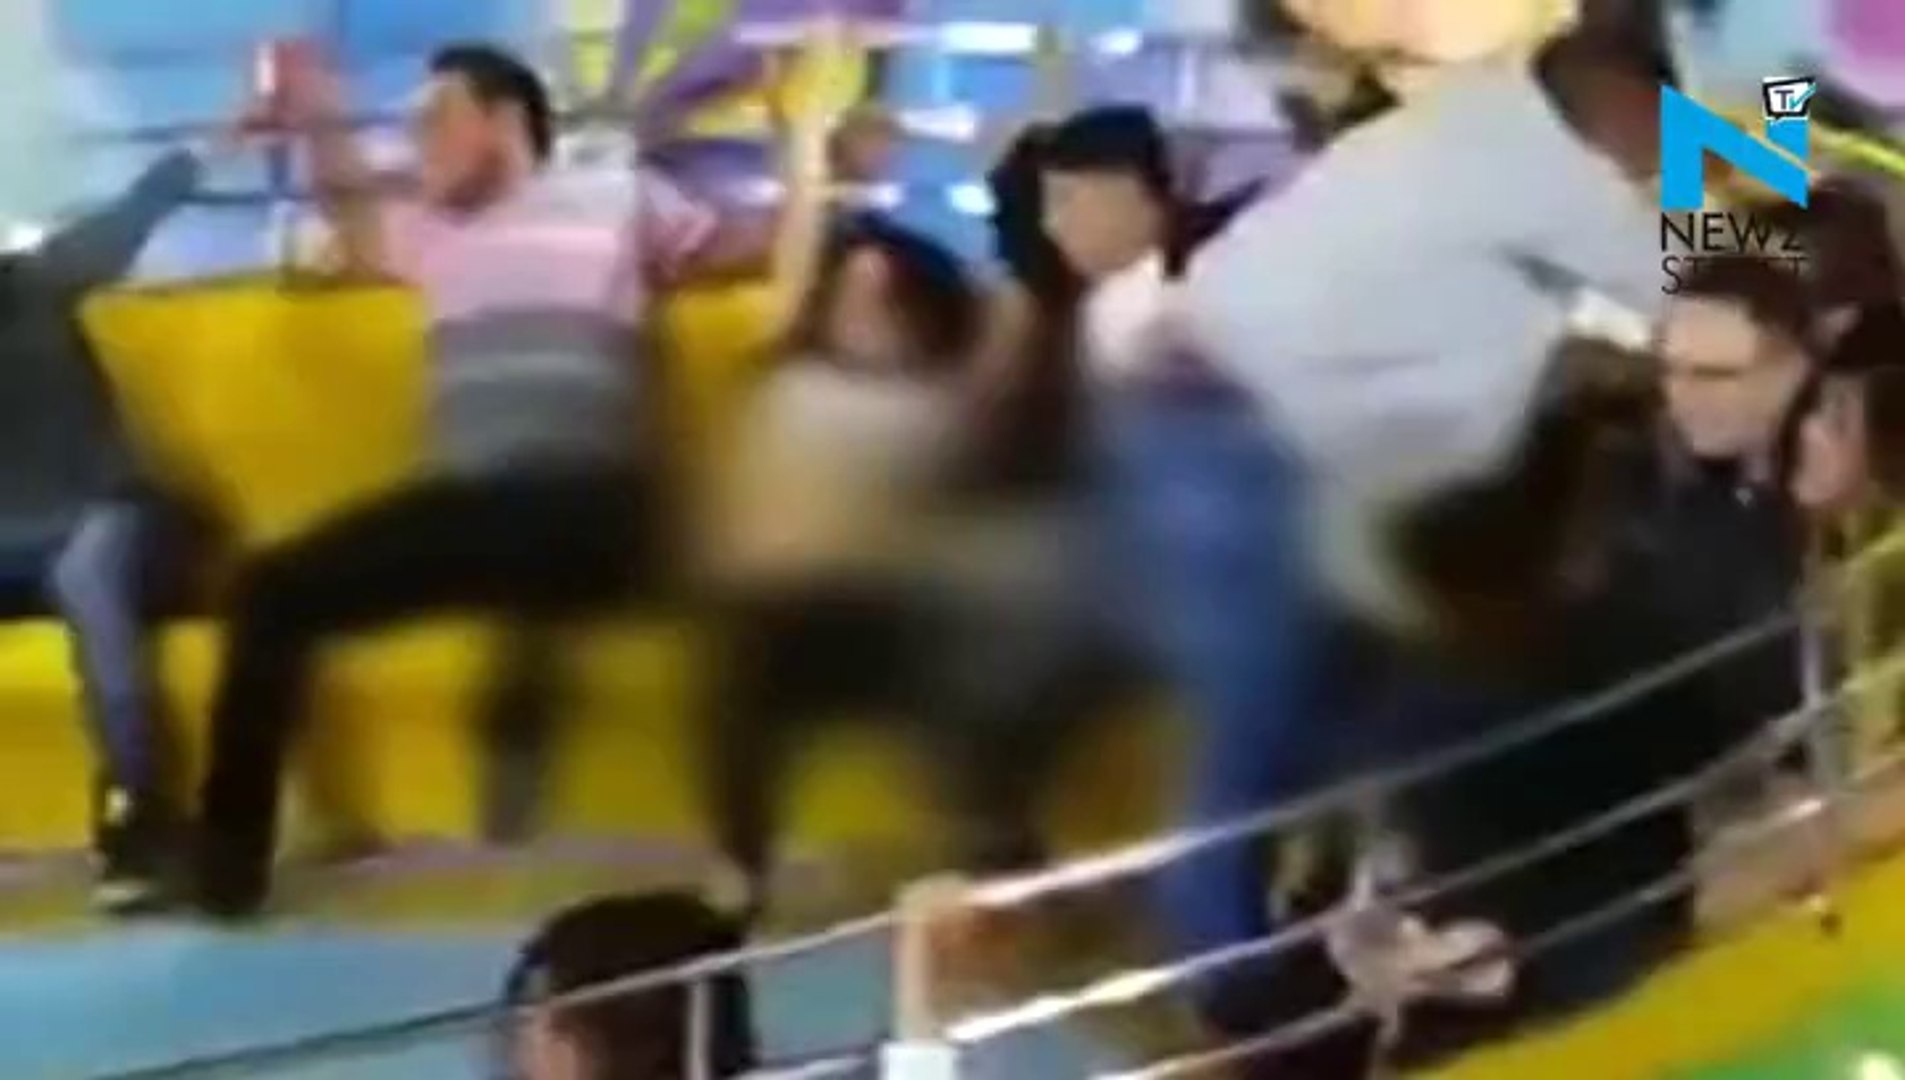 Oh No Woman Suffer Serious Wardrobe Malfunction On Ride Video Dailymotion. 